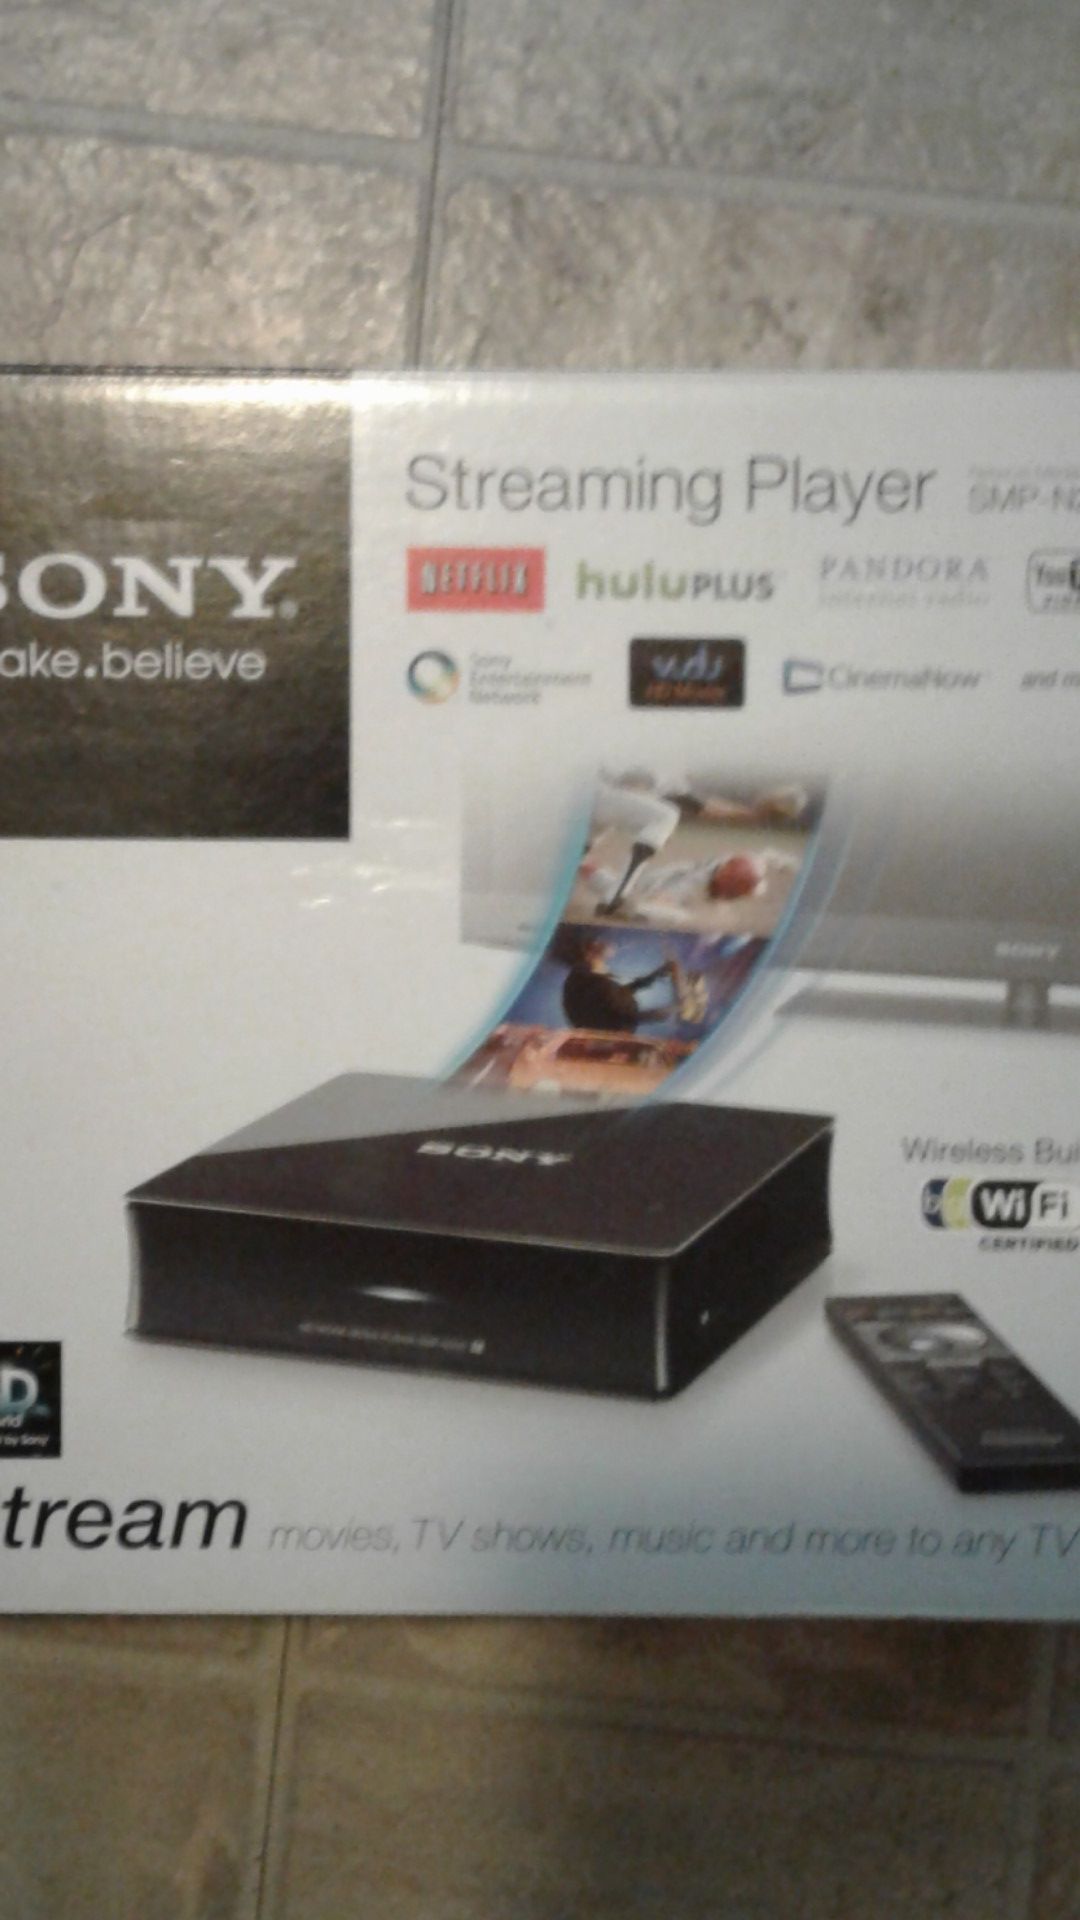 SONY. Streaming Player Digital .. Network Media Player SMP-N200.. built in Wireless...3D......